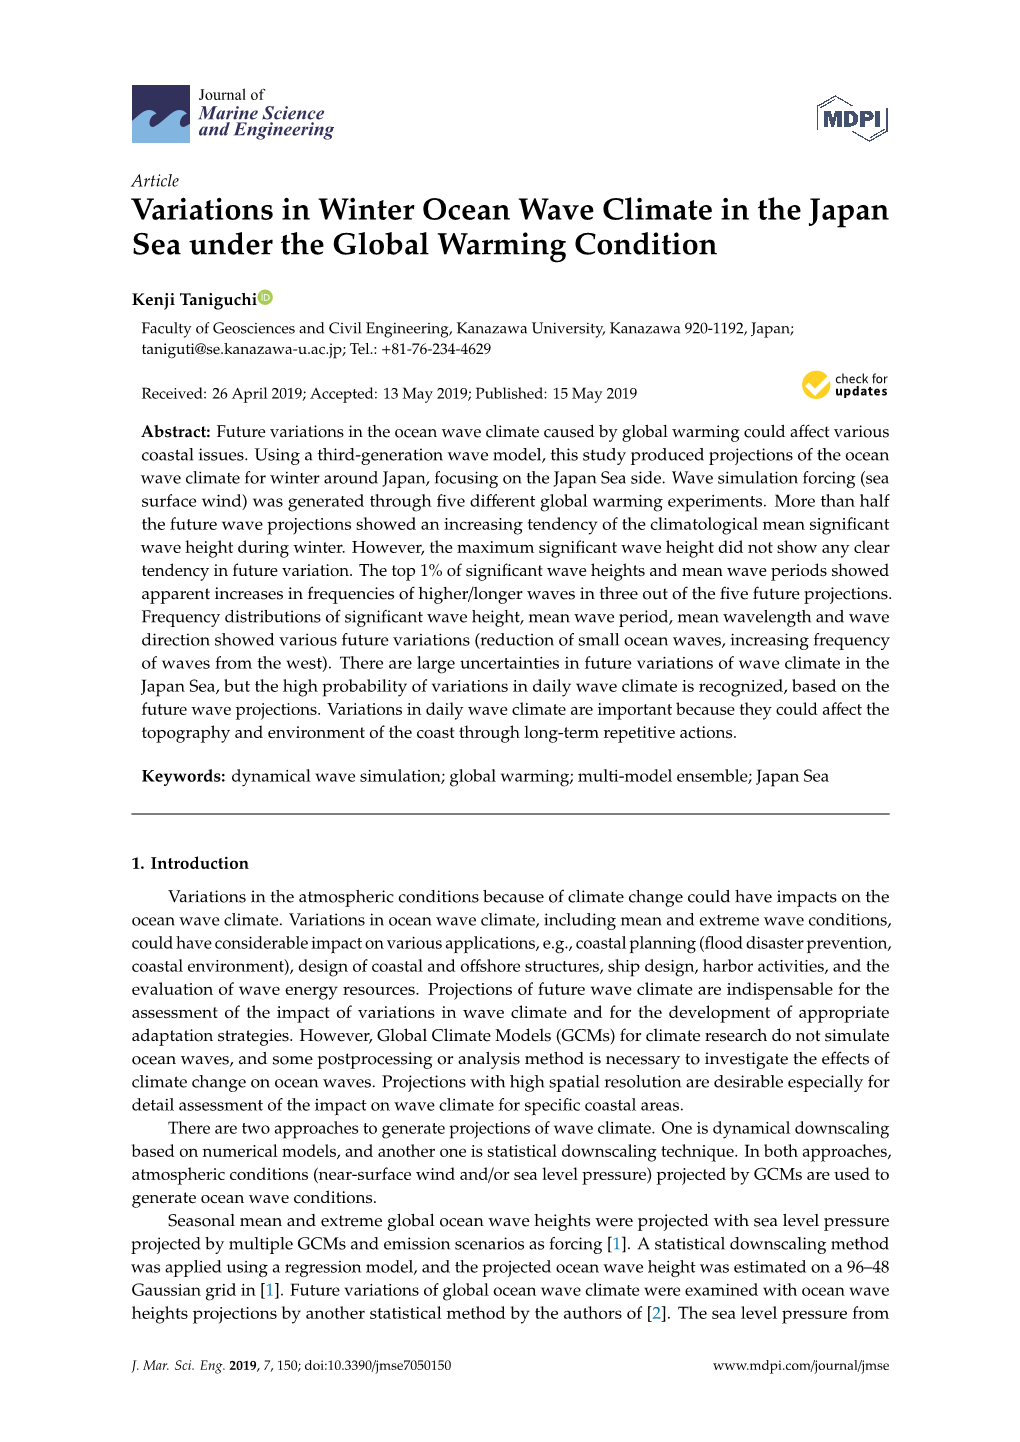 Variations in Winter Ocean Wave Climate in the Japan Sea Under the Global Warming Condition